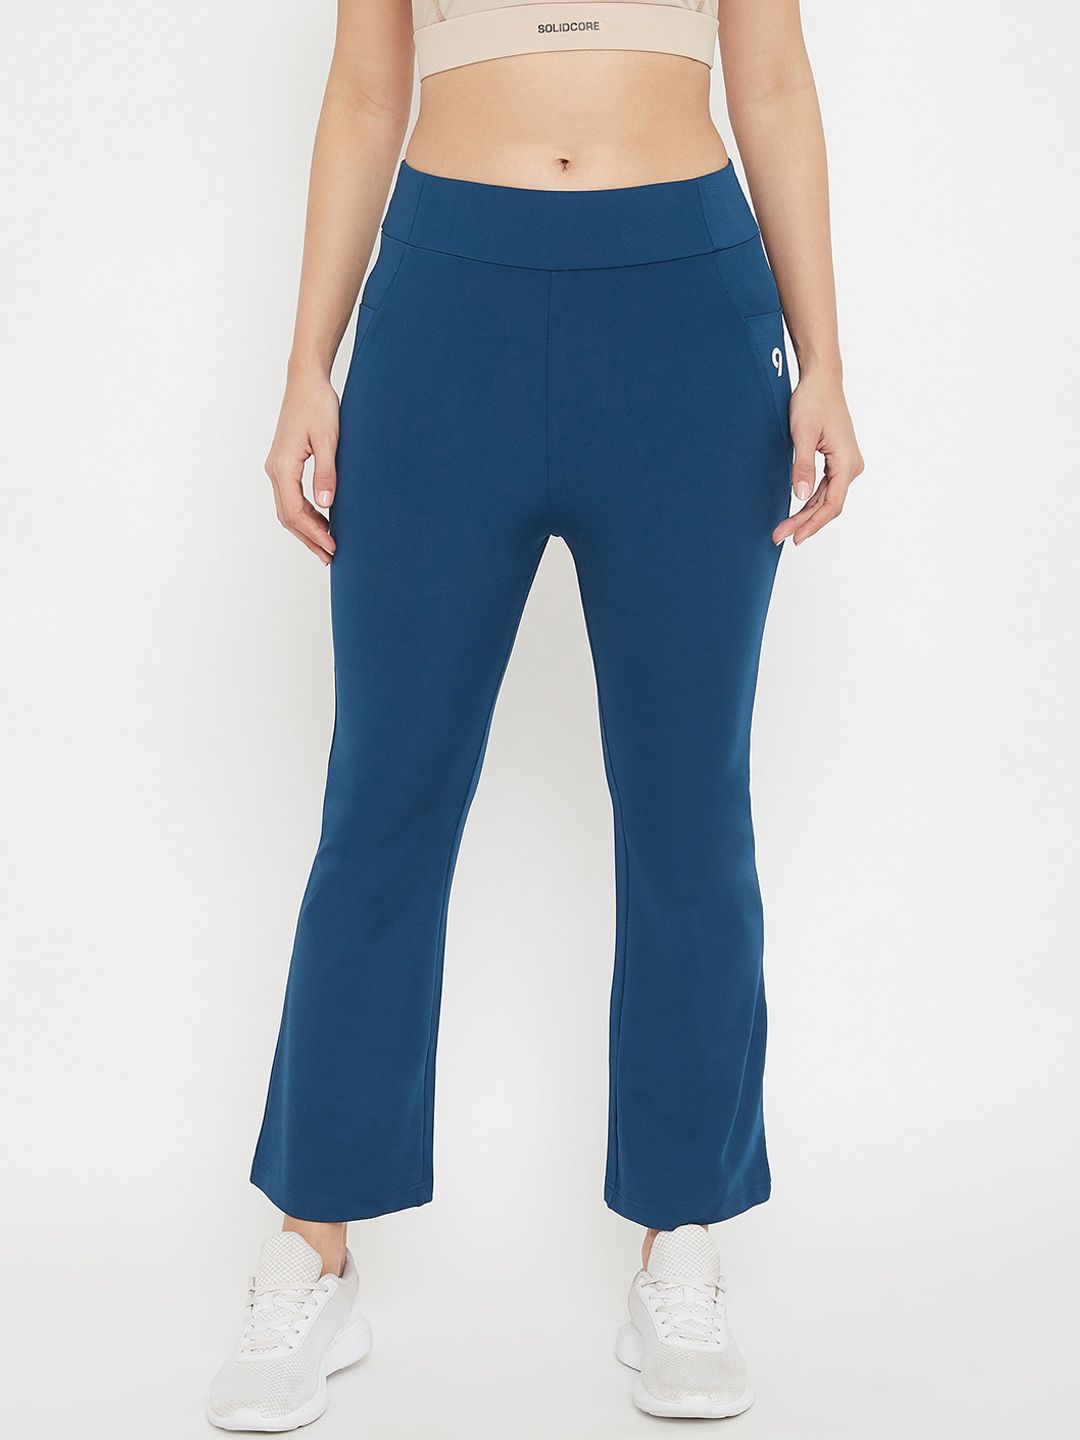 C9 AIRWEAR Women Blue Solid Bootcut Track Pants Price in India